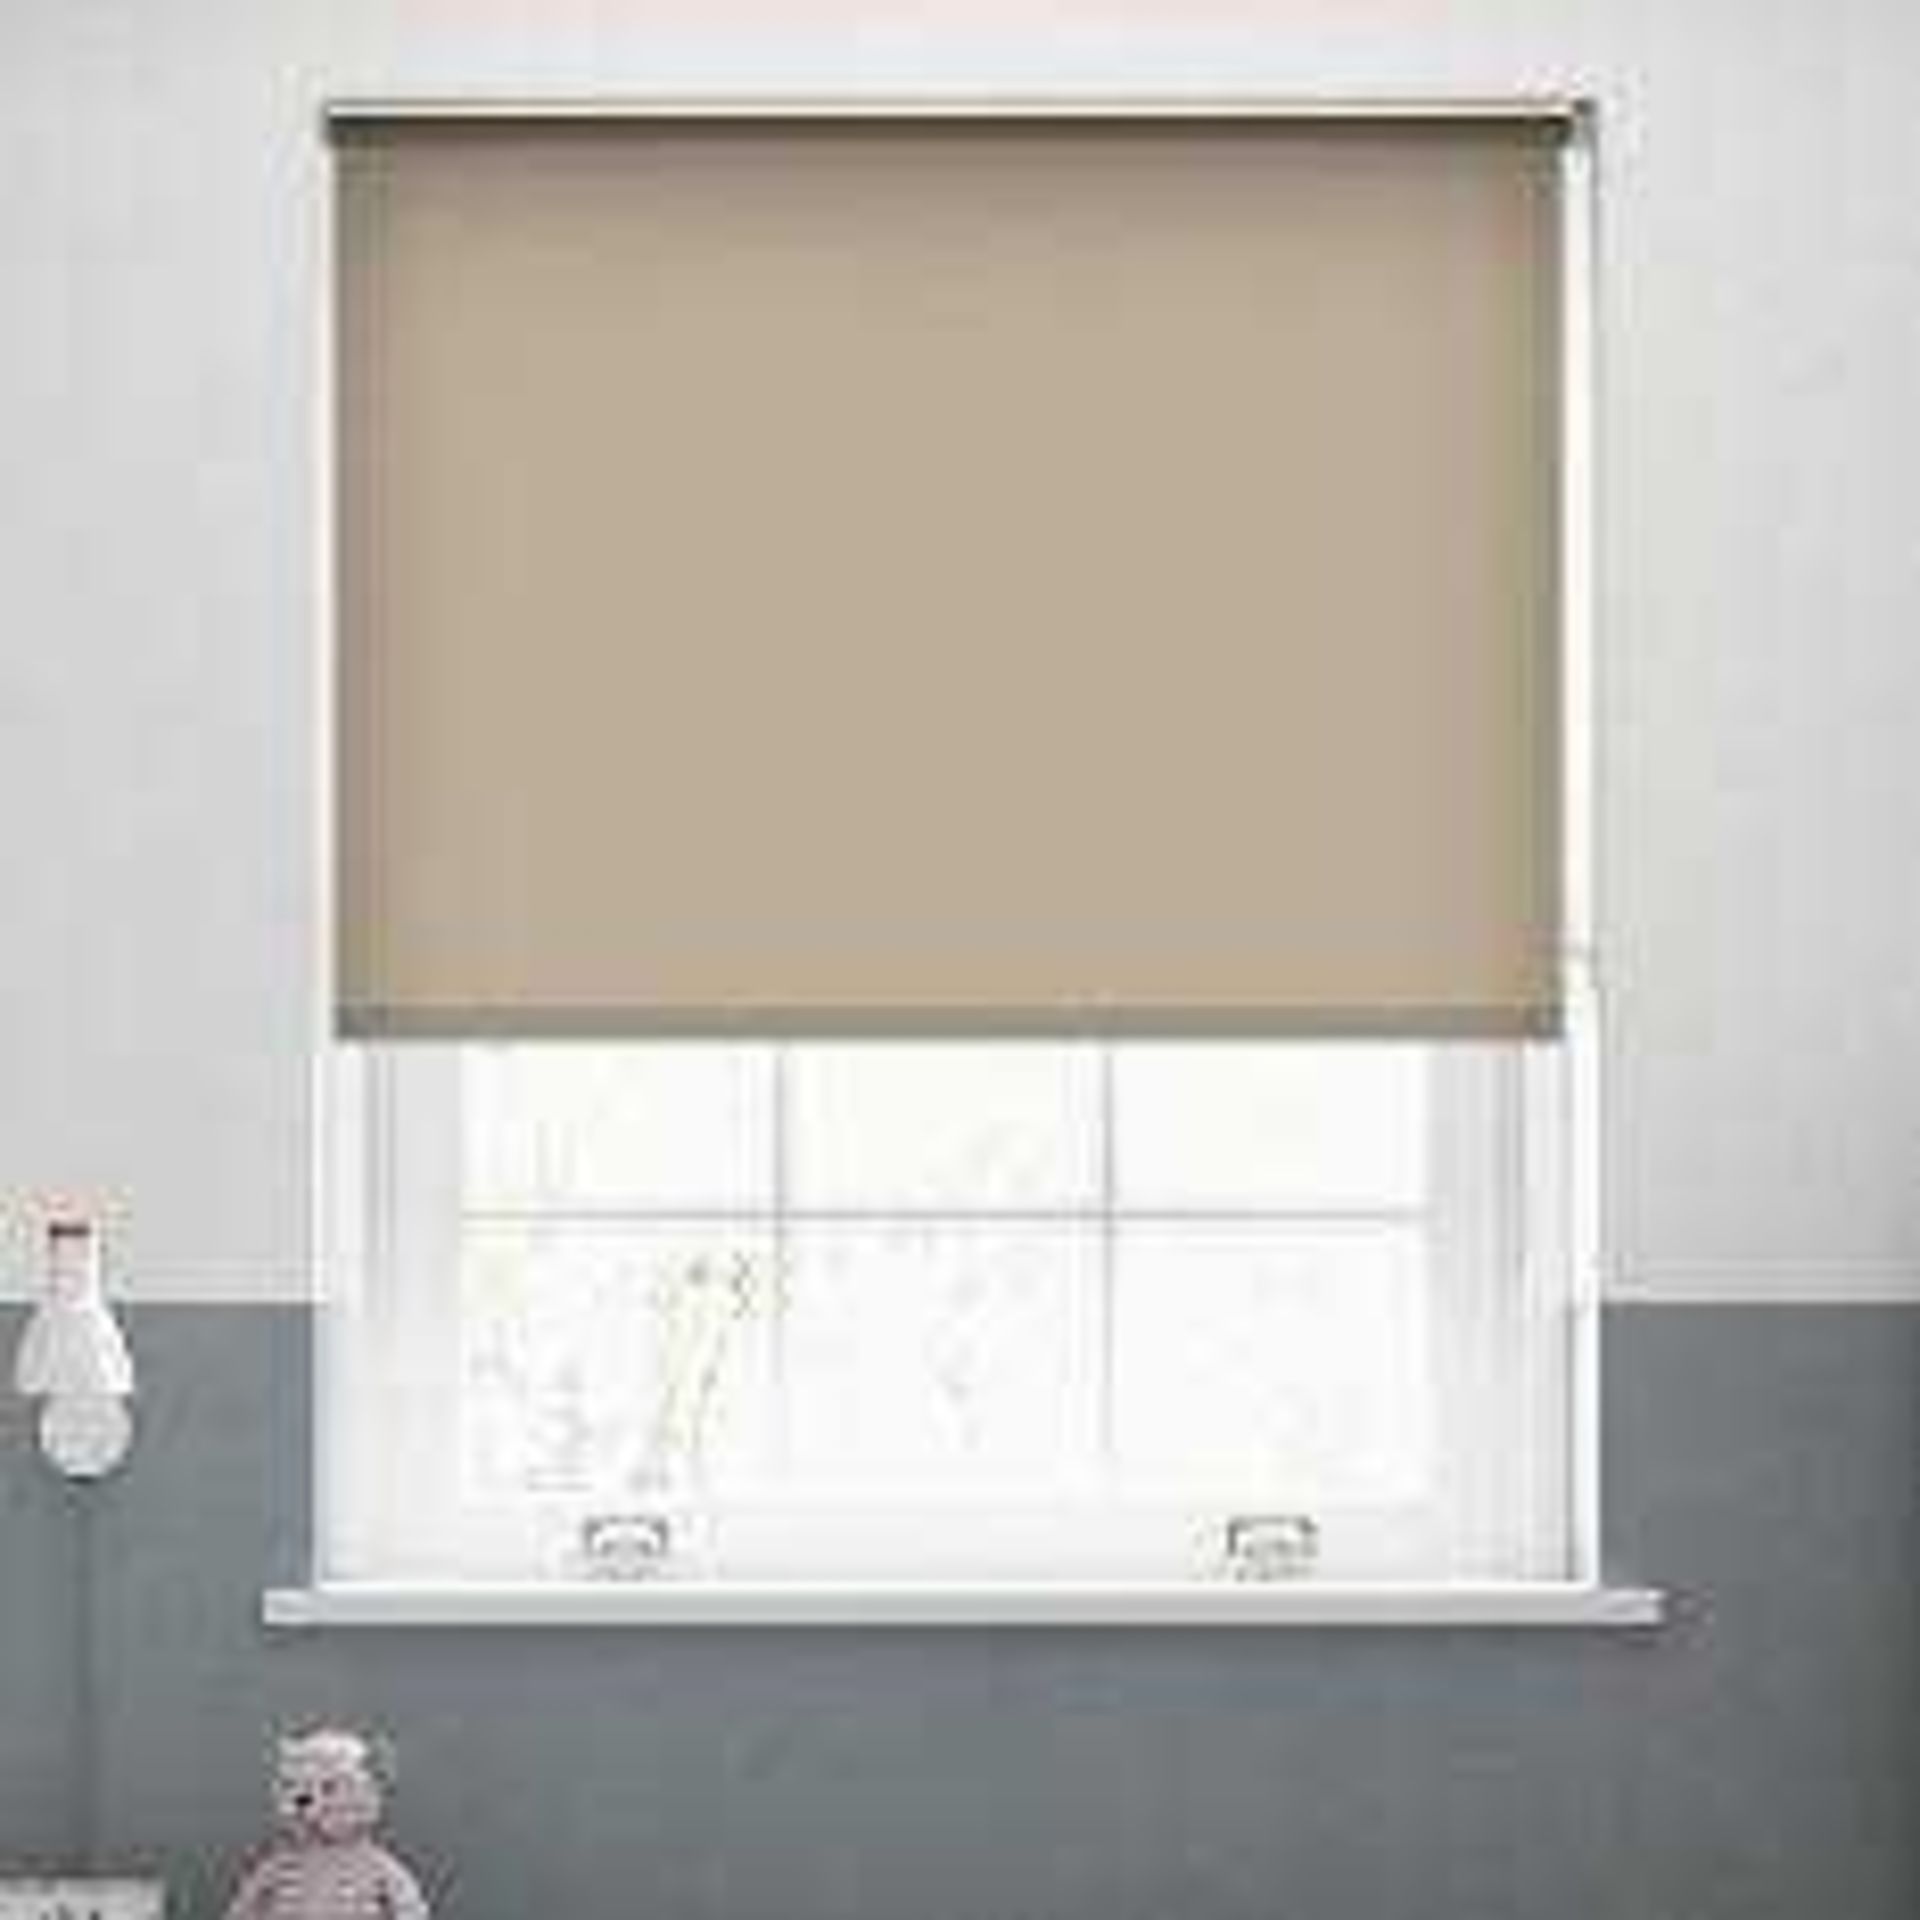 Combined RRP £110 Lot To Contain 4 Blackout Roller Blinds In Beige